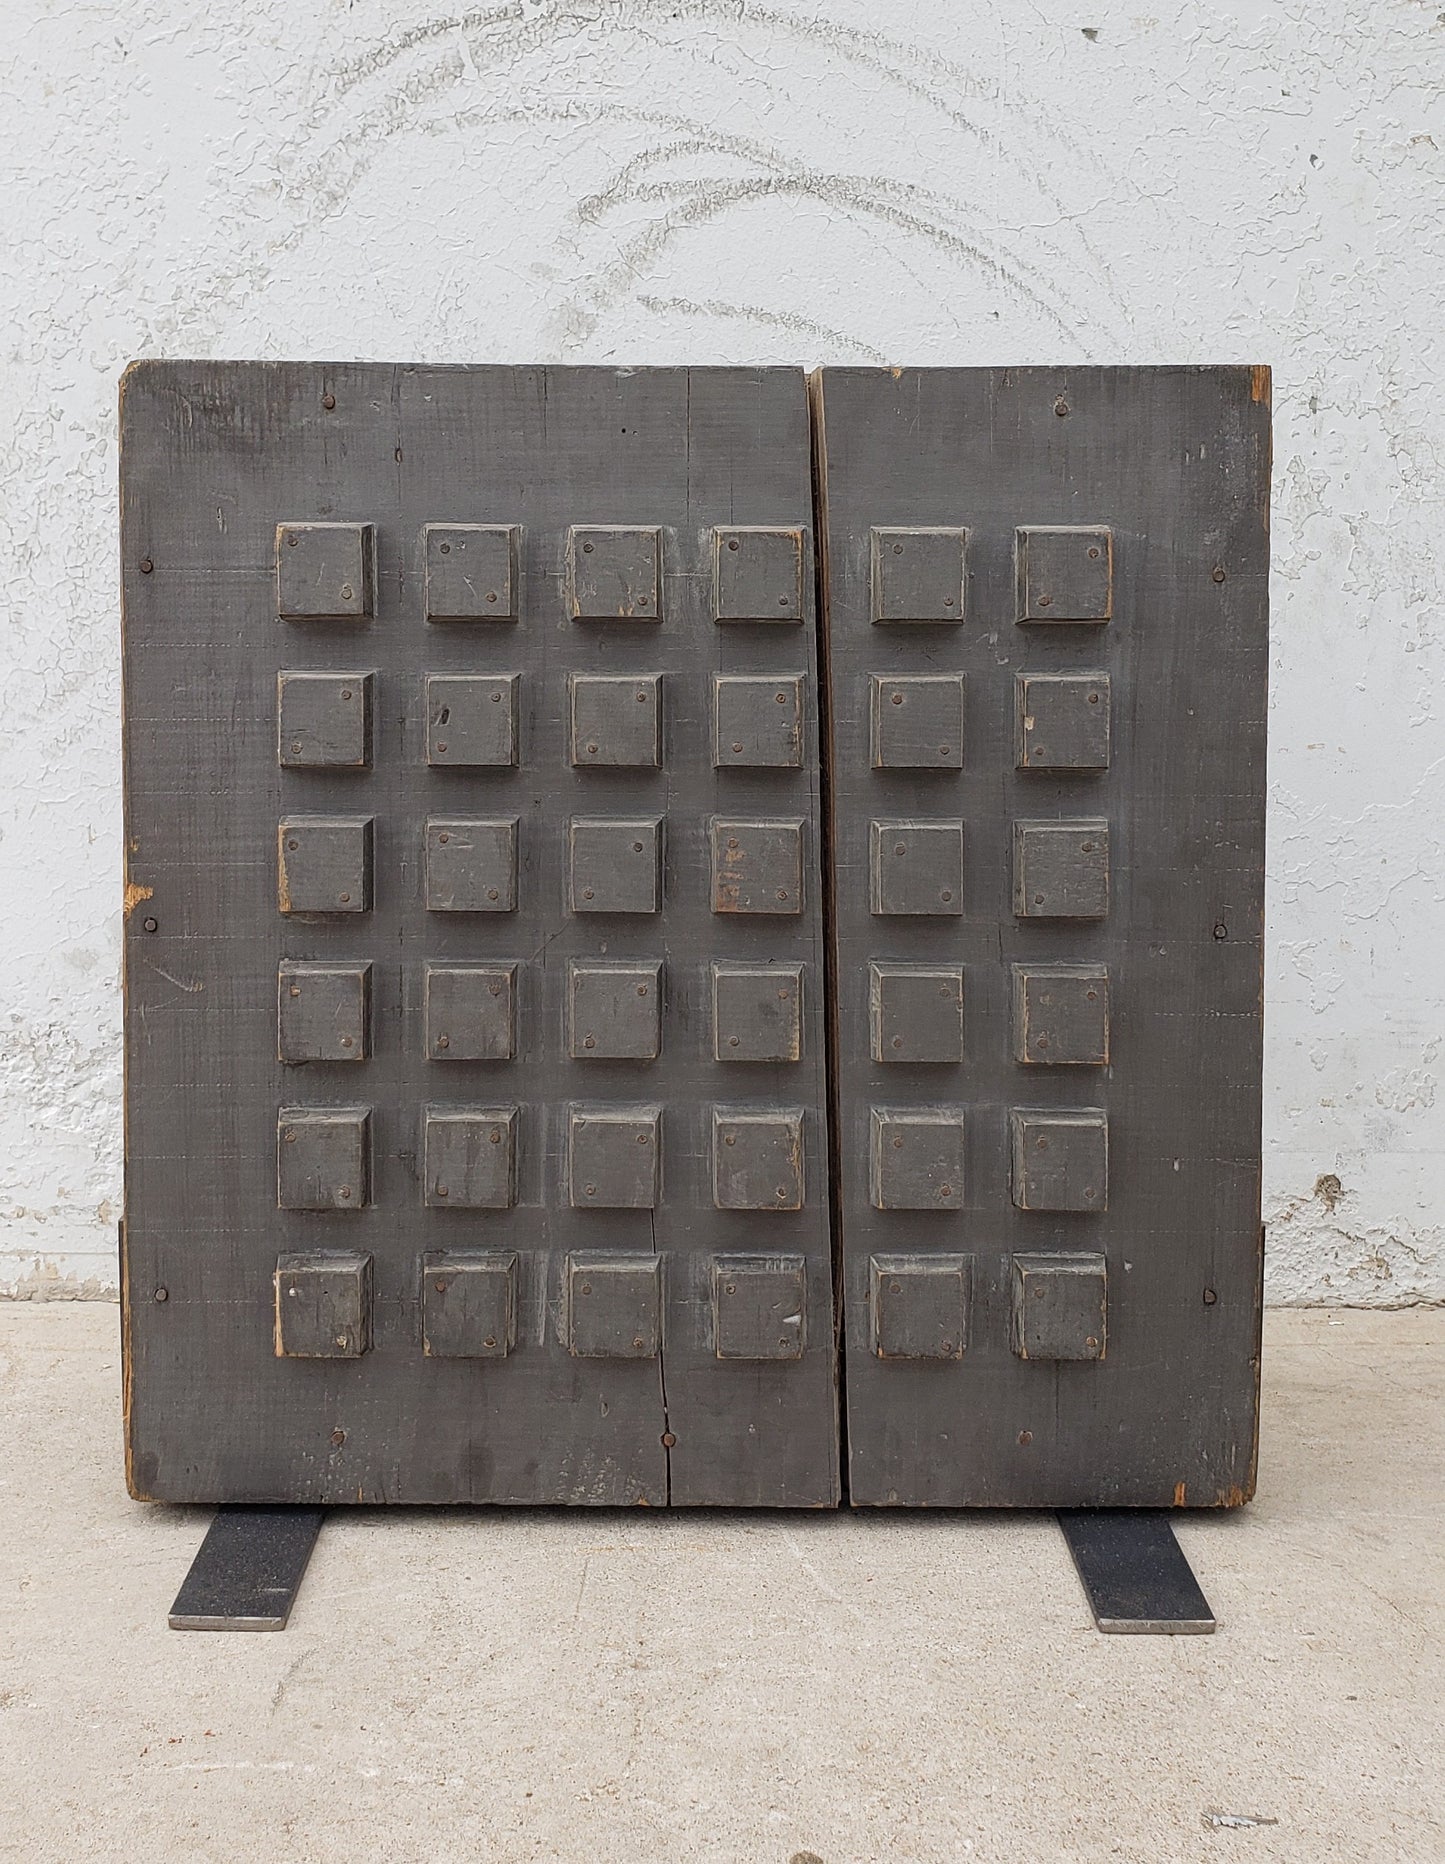 Double-sided Wooden Industrial Mold from L'isle sur la Sorgue on Stand